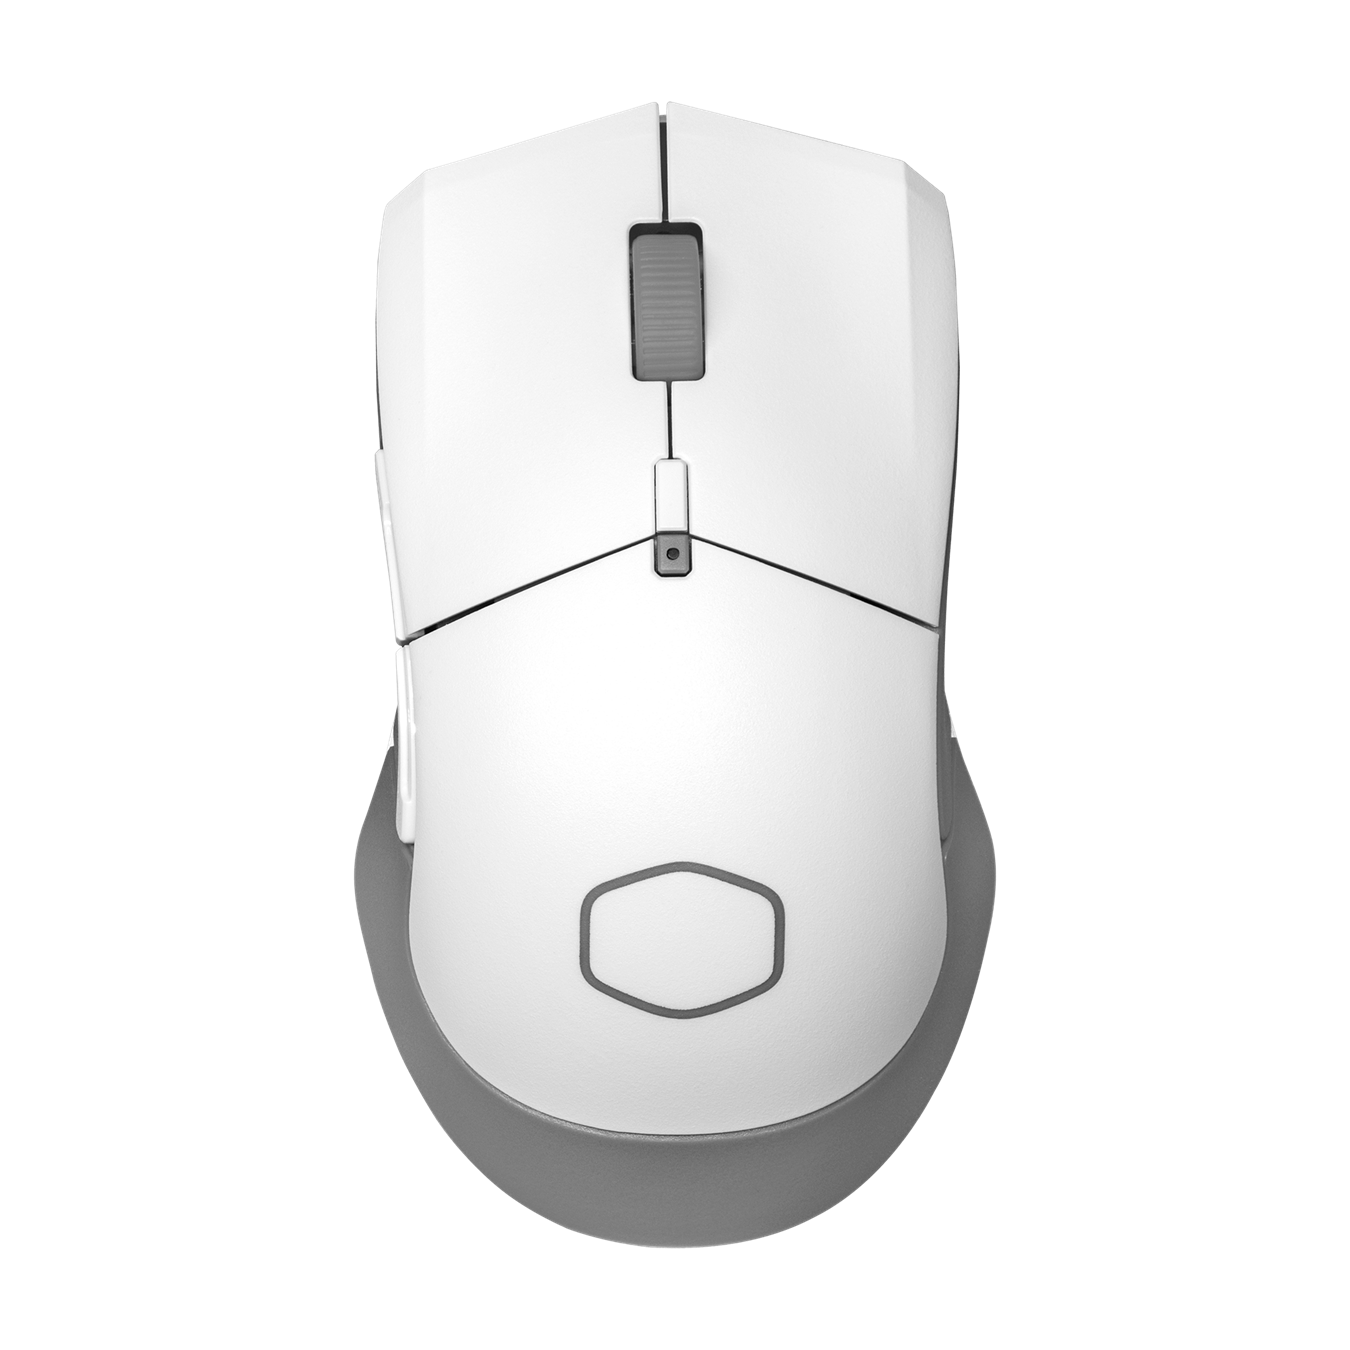 MM311 White Edition Wireless Mouse - Optimized for right-handers with two side buttons and lightweight design without exterior holes that compromise on aesthetics, weighs in at 77g even with a AA battery included